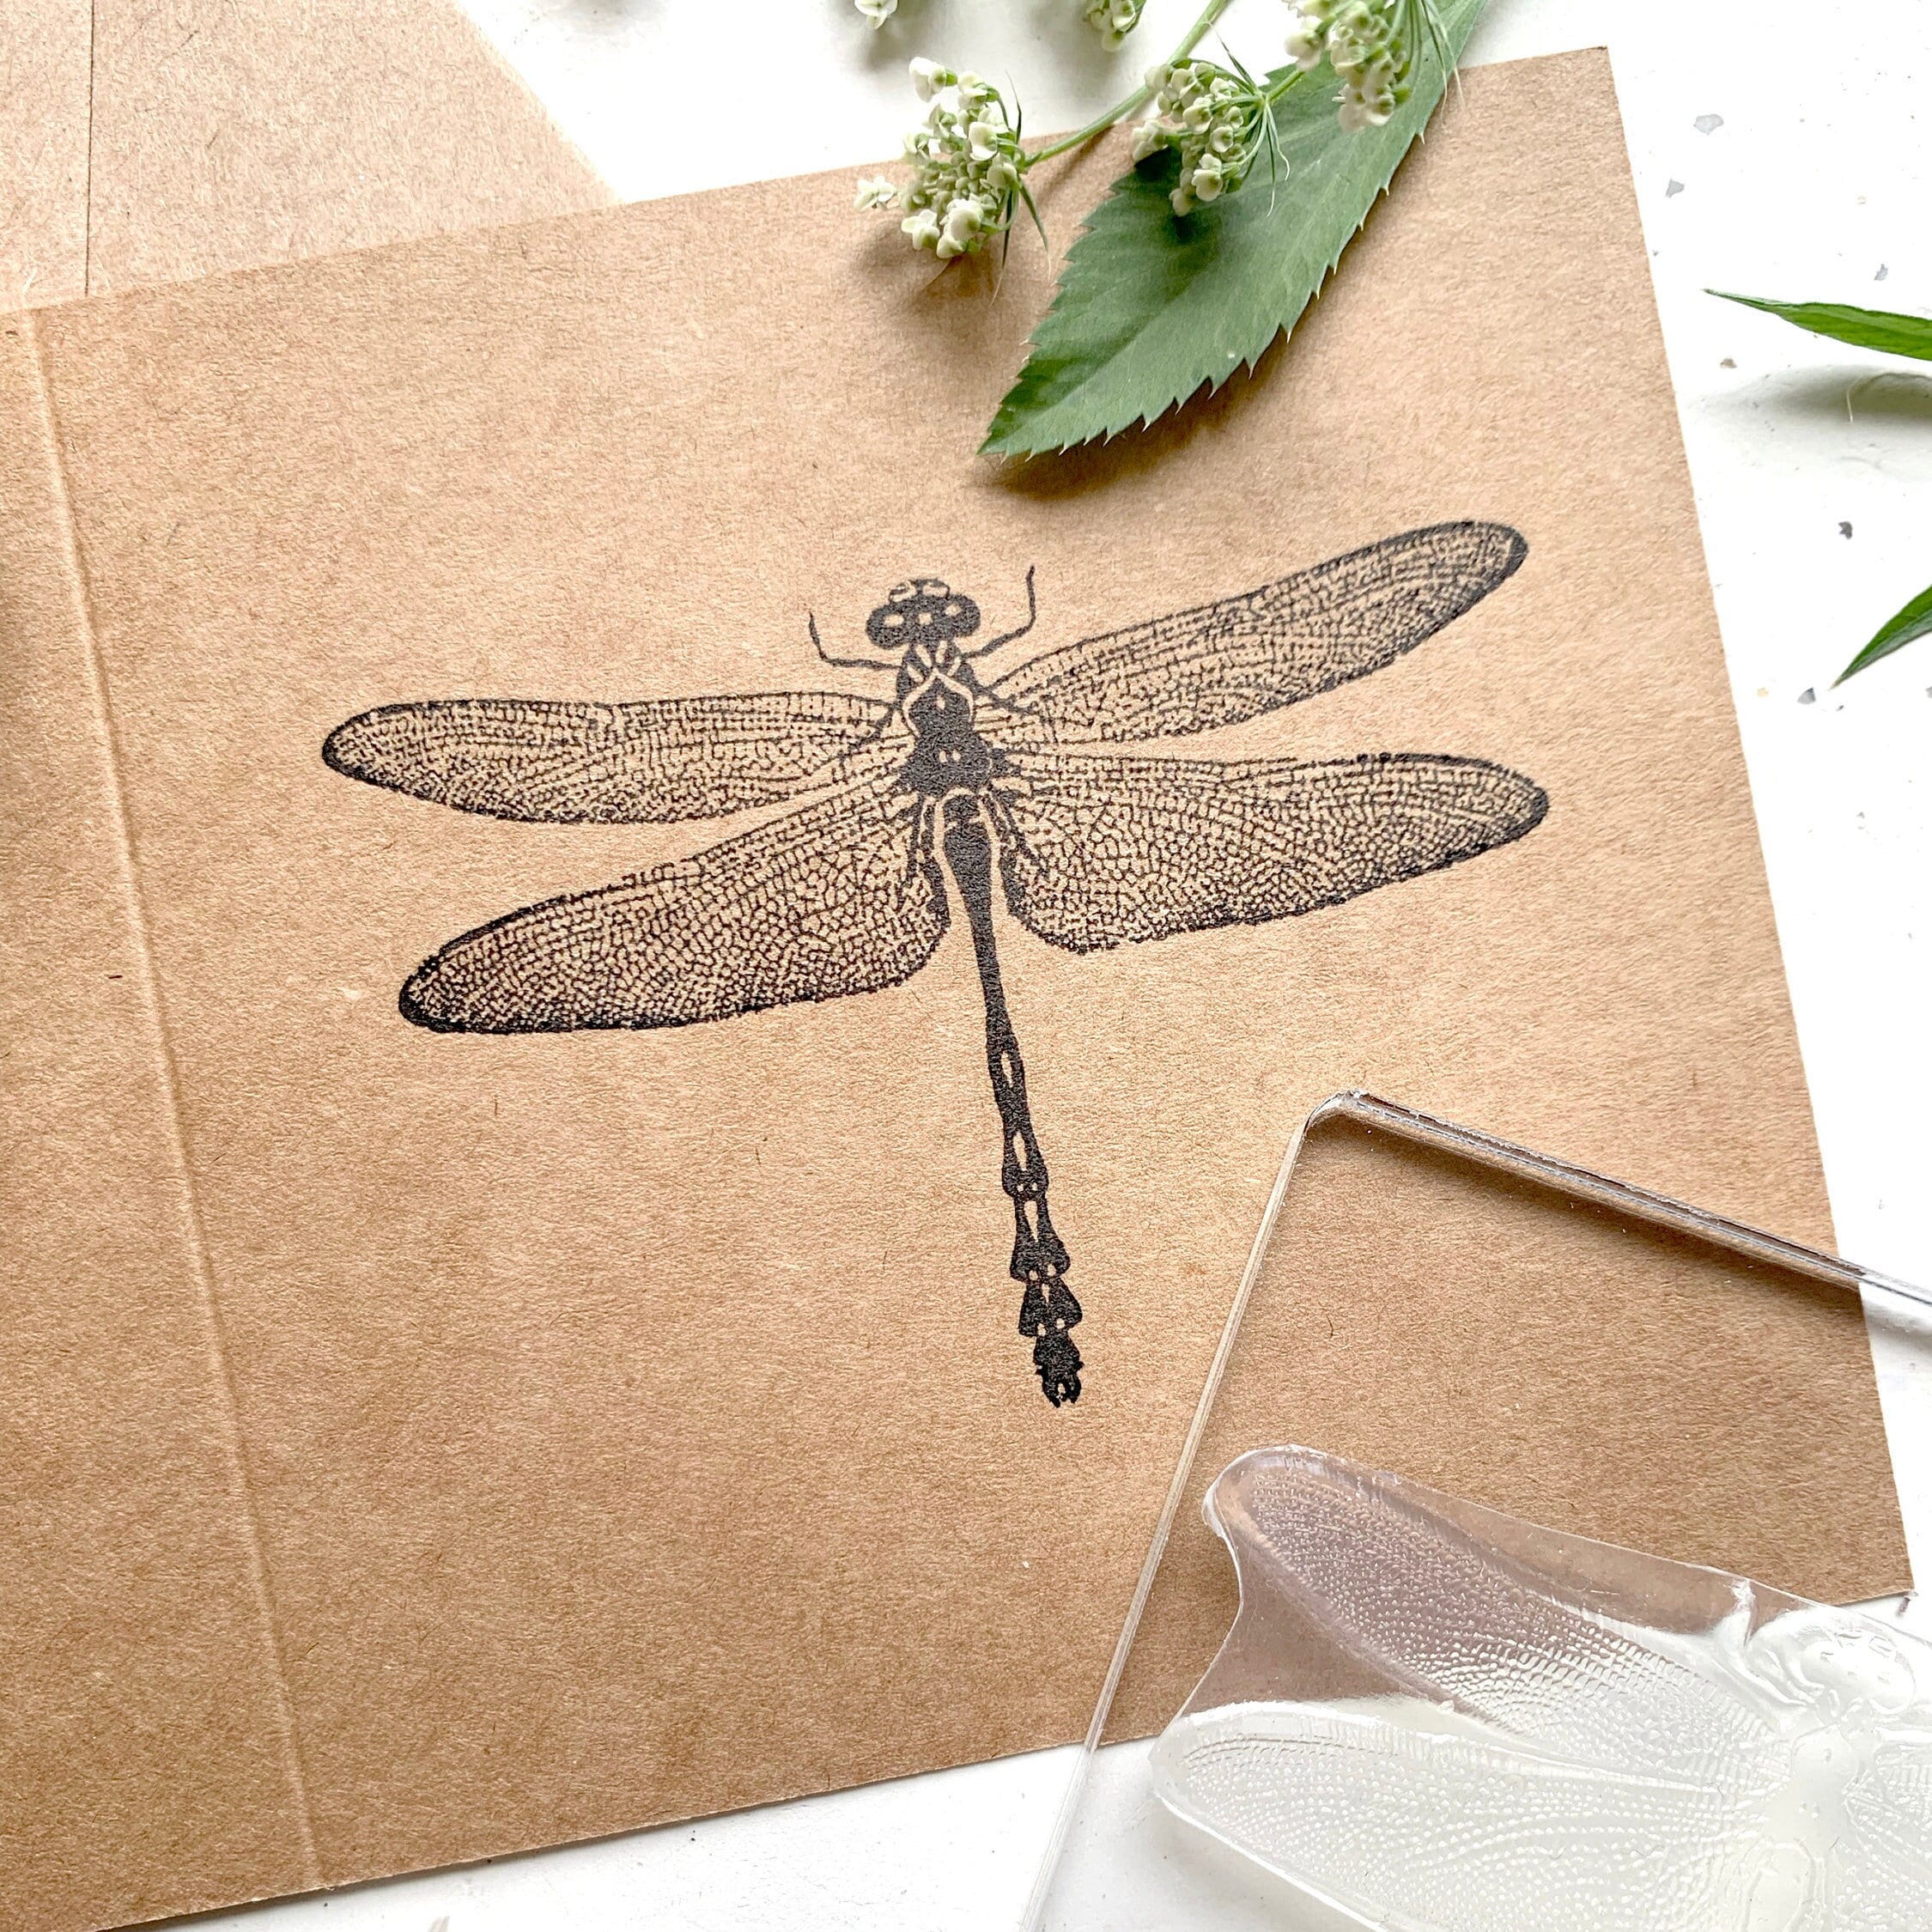 Ex libris Dragonfly Book Stamp Personalized, Insect Bug Floral